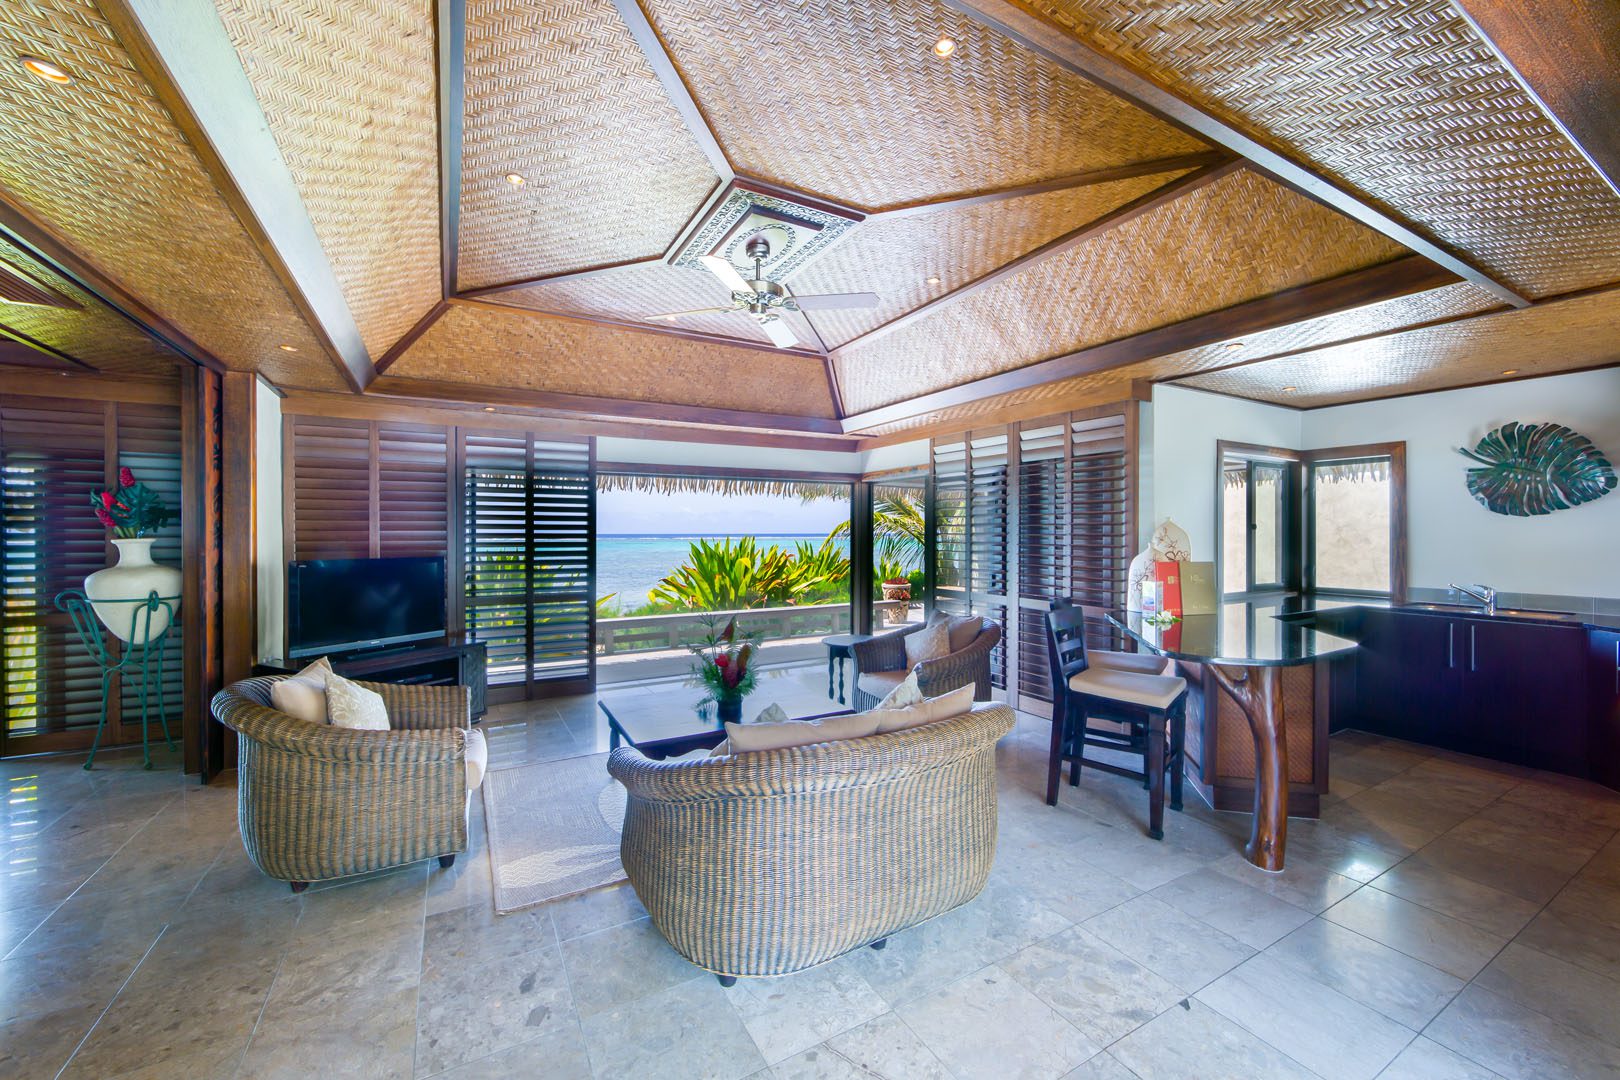 Te Manava Luxury Villas & spa Ultimate beachfront villa view from the inside the lounge & modern kitchen with a Polynesian décor